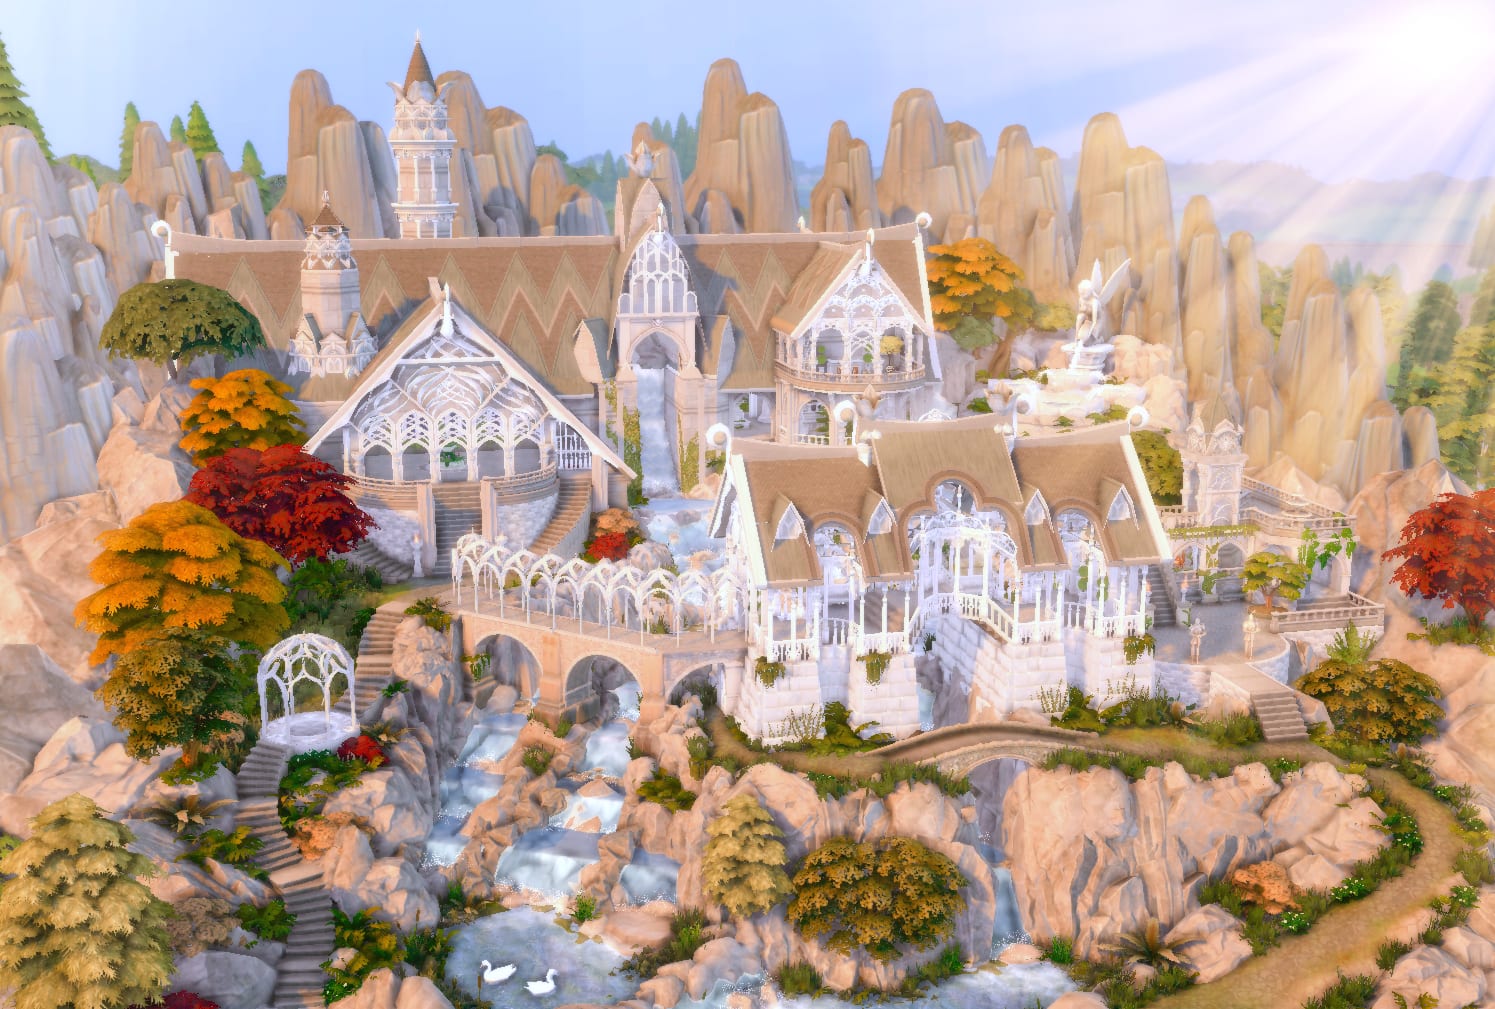 Rivendell from Lord of the Rings, built without CC :)